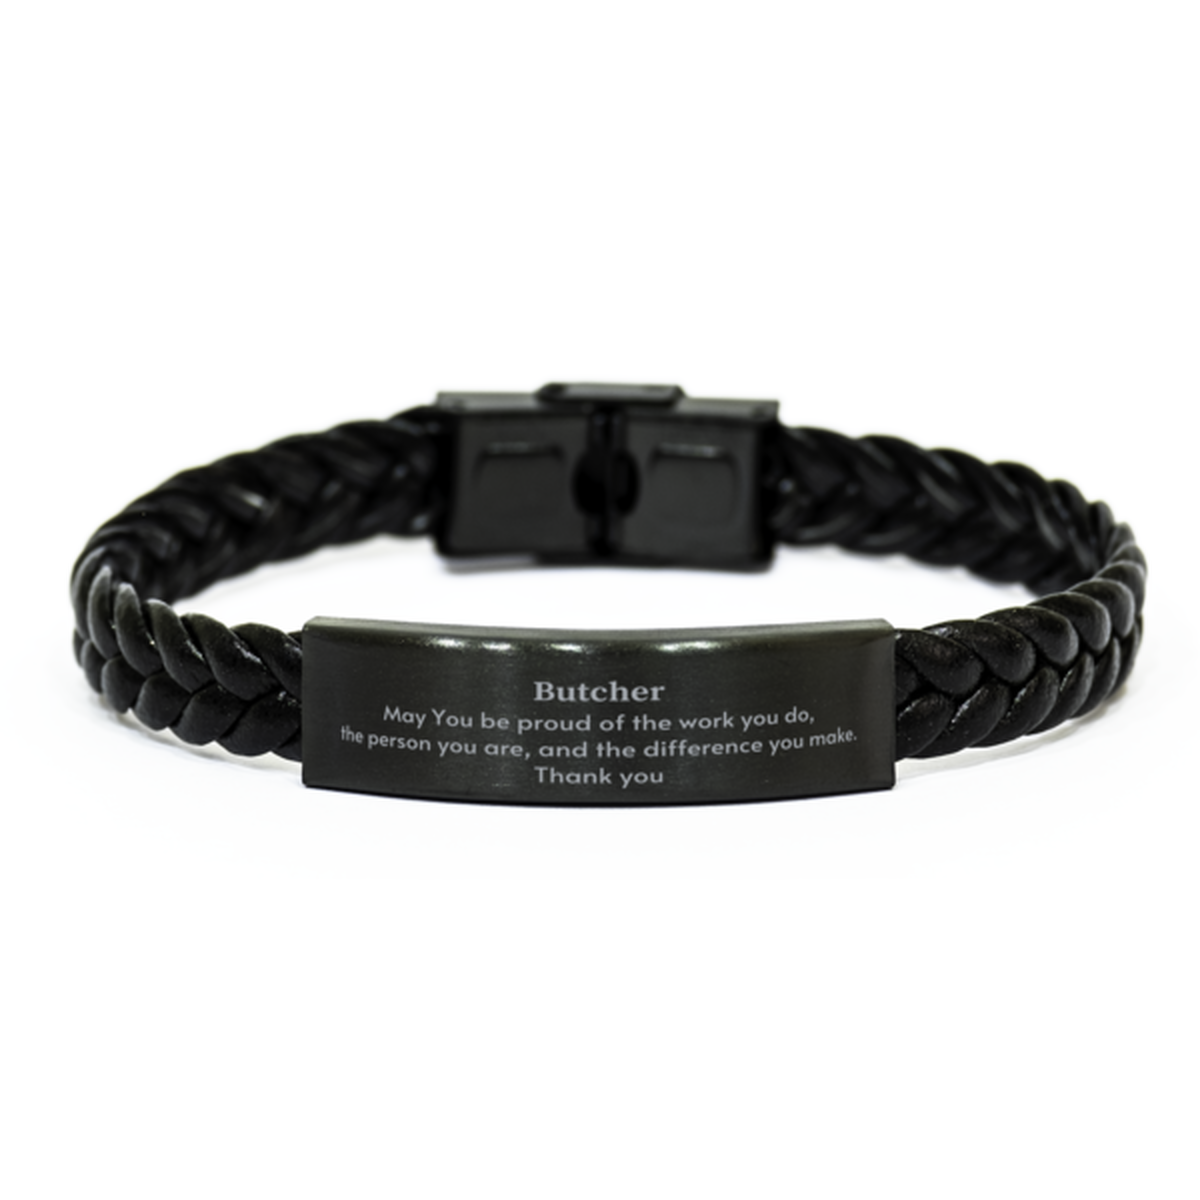 Heartwarming Braided Leather Bracelet Retirement Coworkers Gifts for Butcher, Butcher May You be proud of the work you do, the person you are Gifts for Boss Men Women Friends